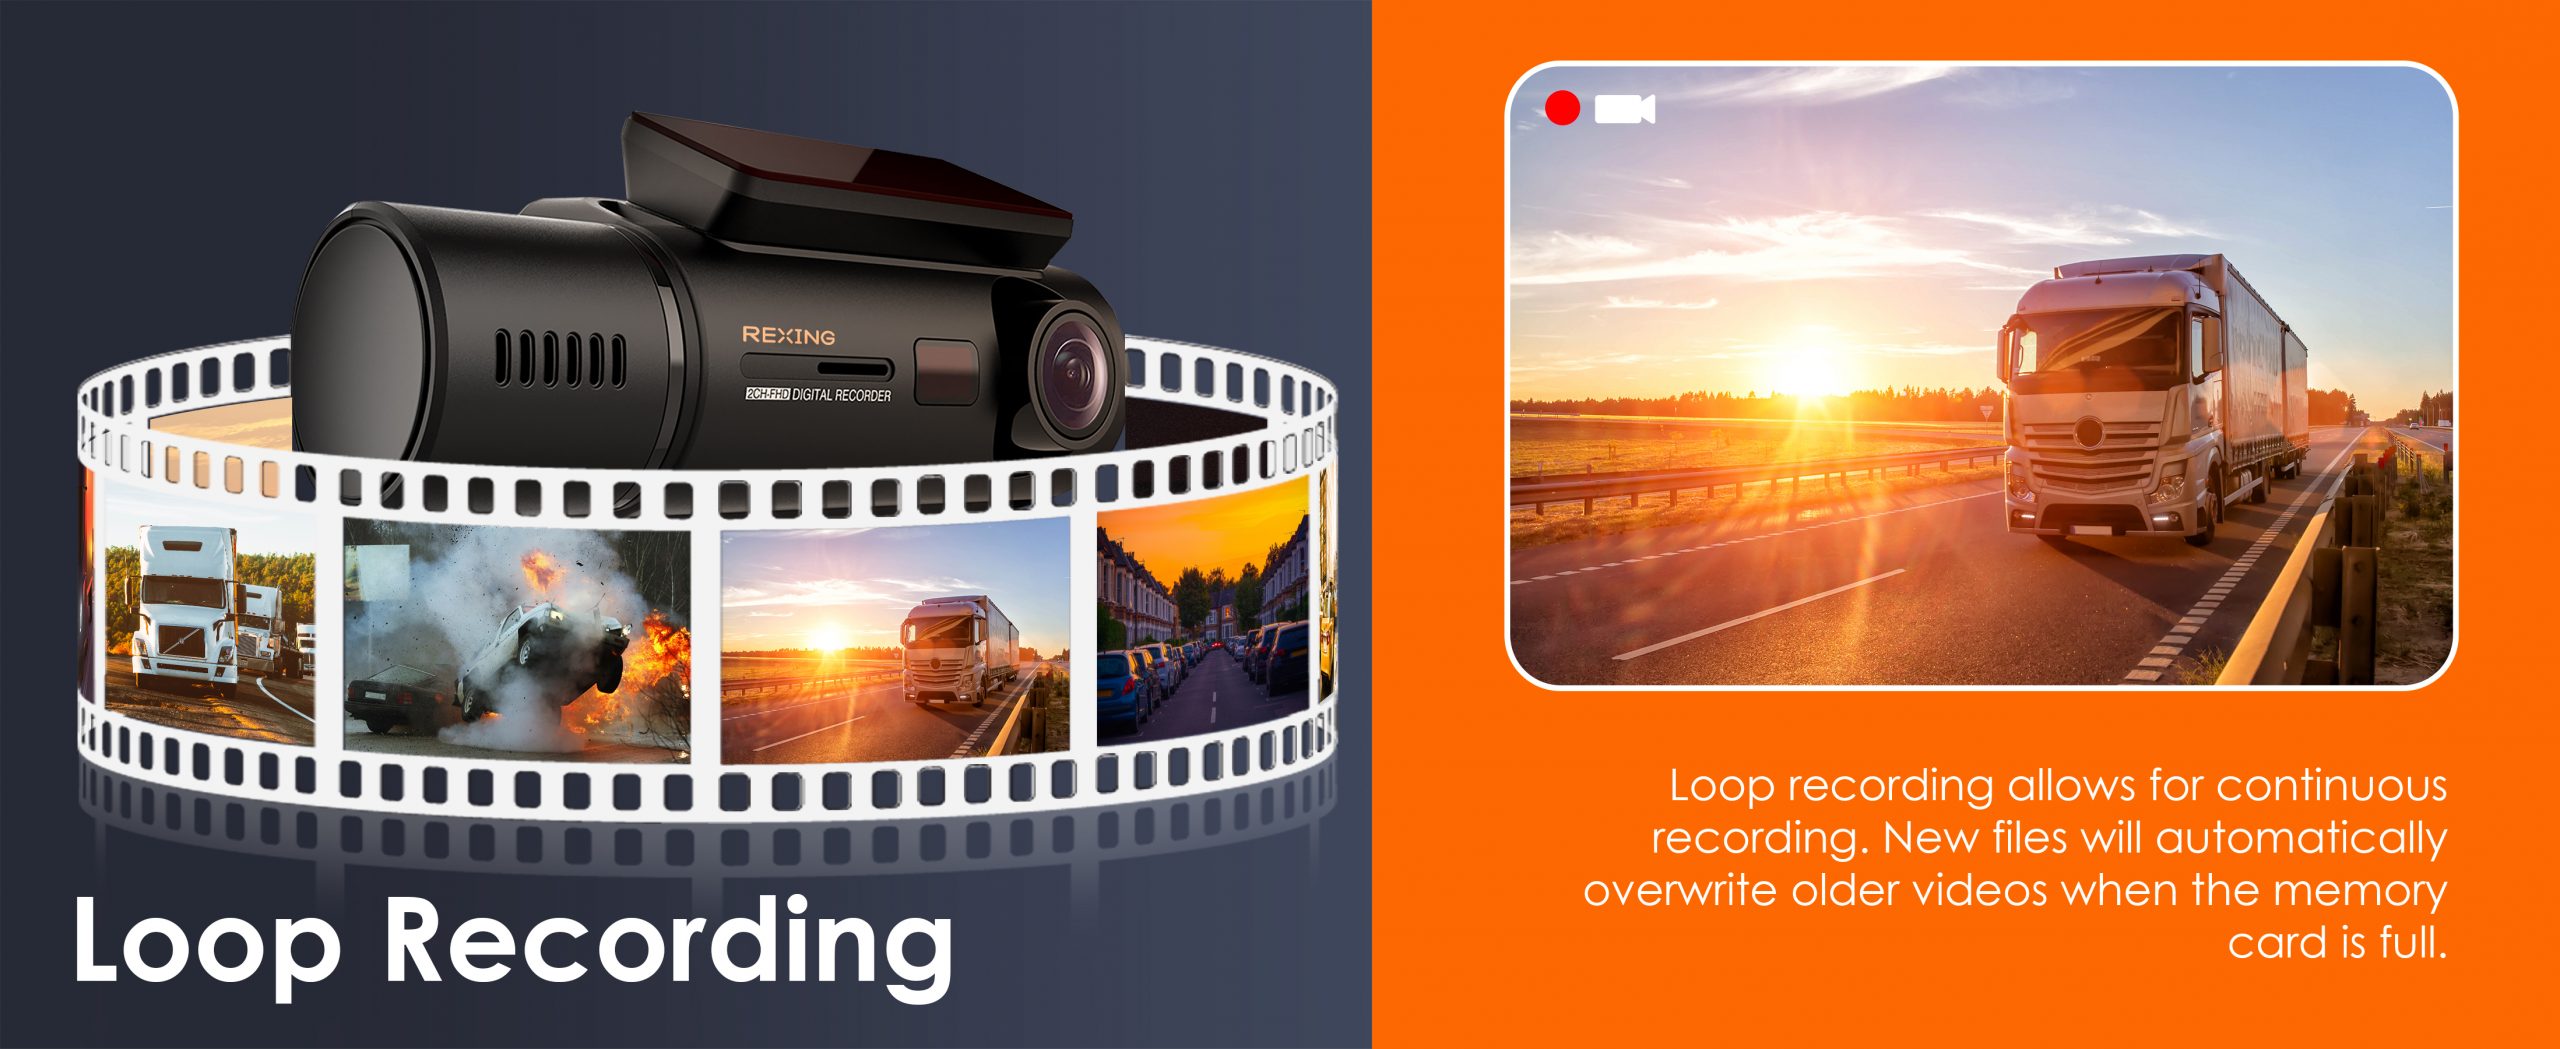 Rexing - V33 3 Channel 1440p+1440p+1440p Resolution Dashcam with